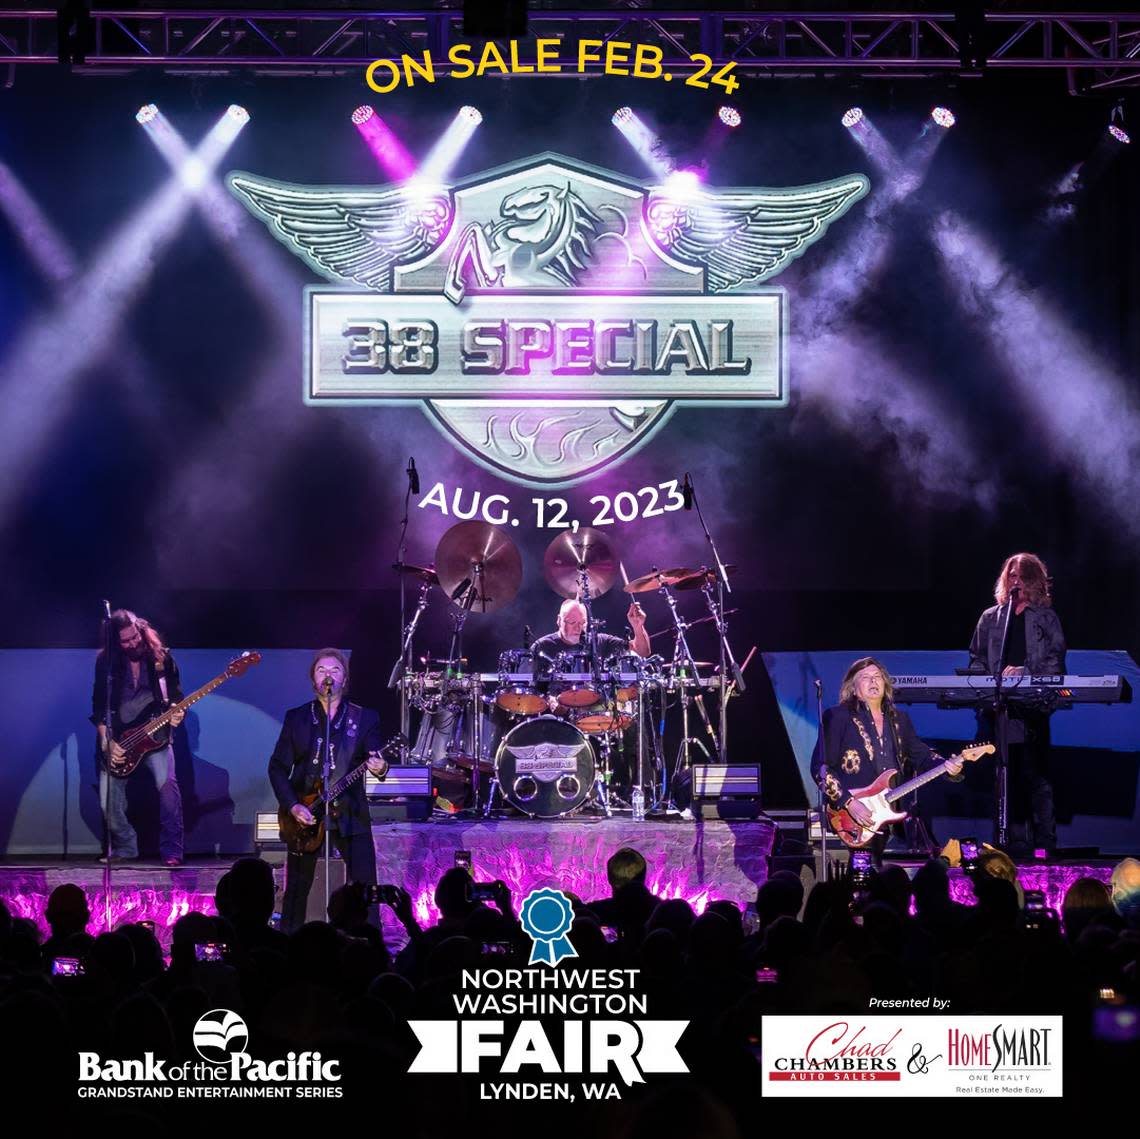 Northwest Washington Fair poster for the 7 p.m. Saturday, Aug. 12, concert by Southern rock band 38 Special.